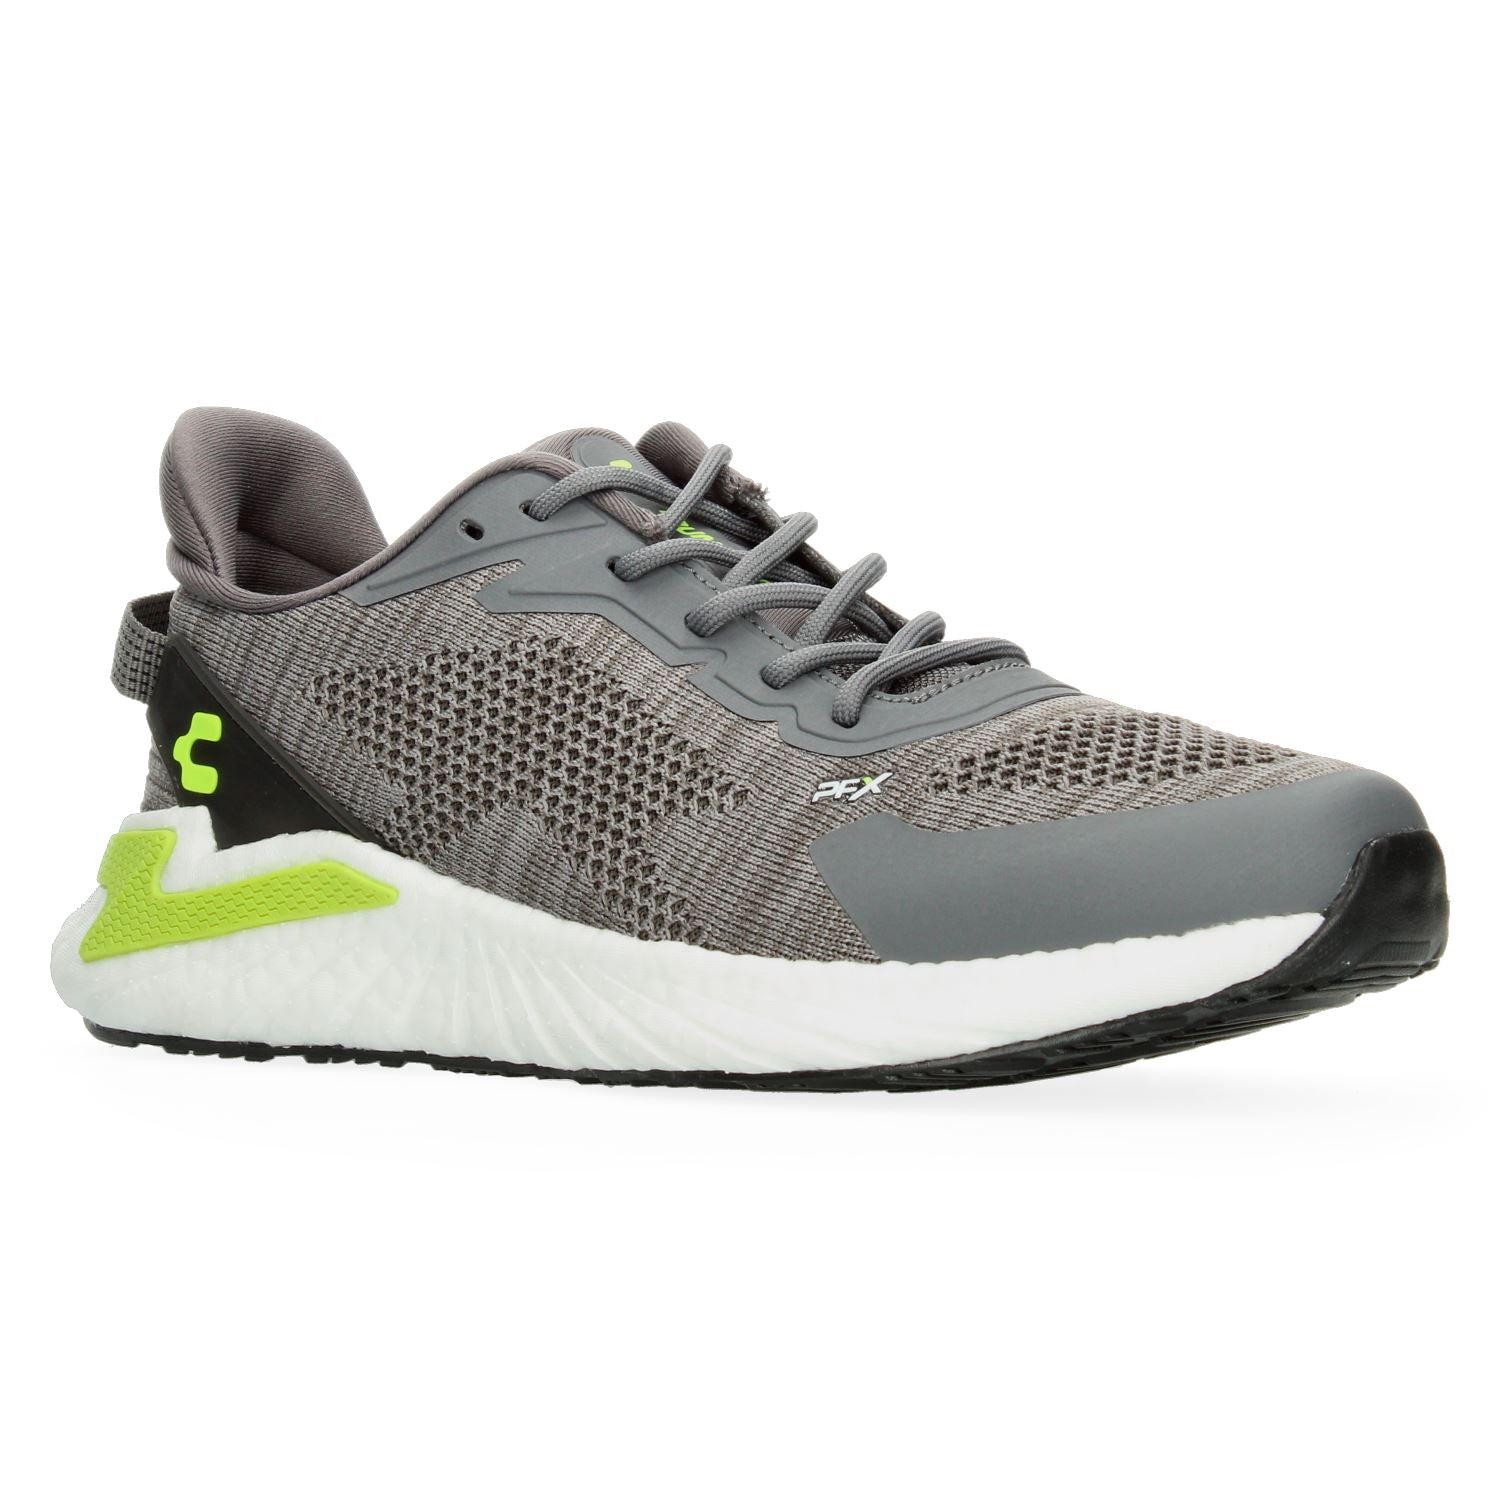 Tenis Charly para Hombre 1086132001 Gris [CHY3330] CHARLY 